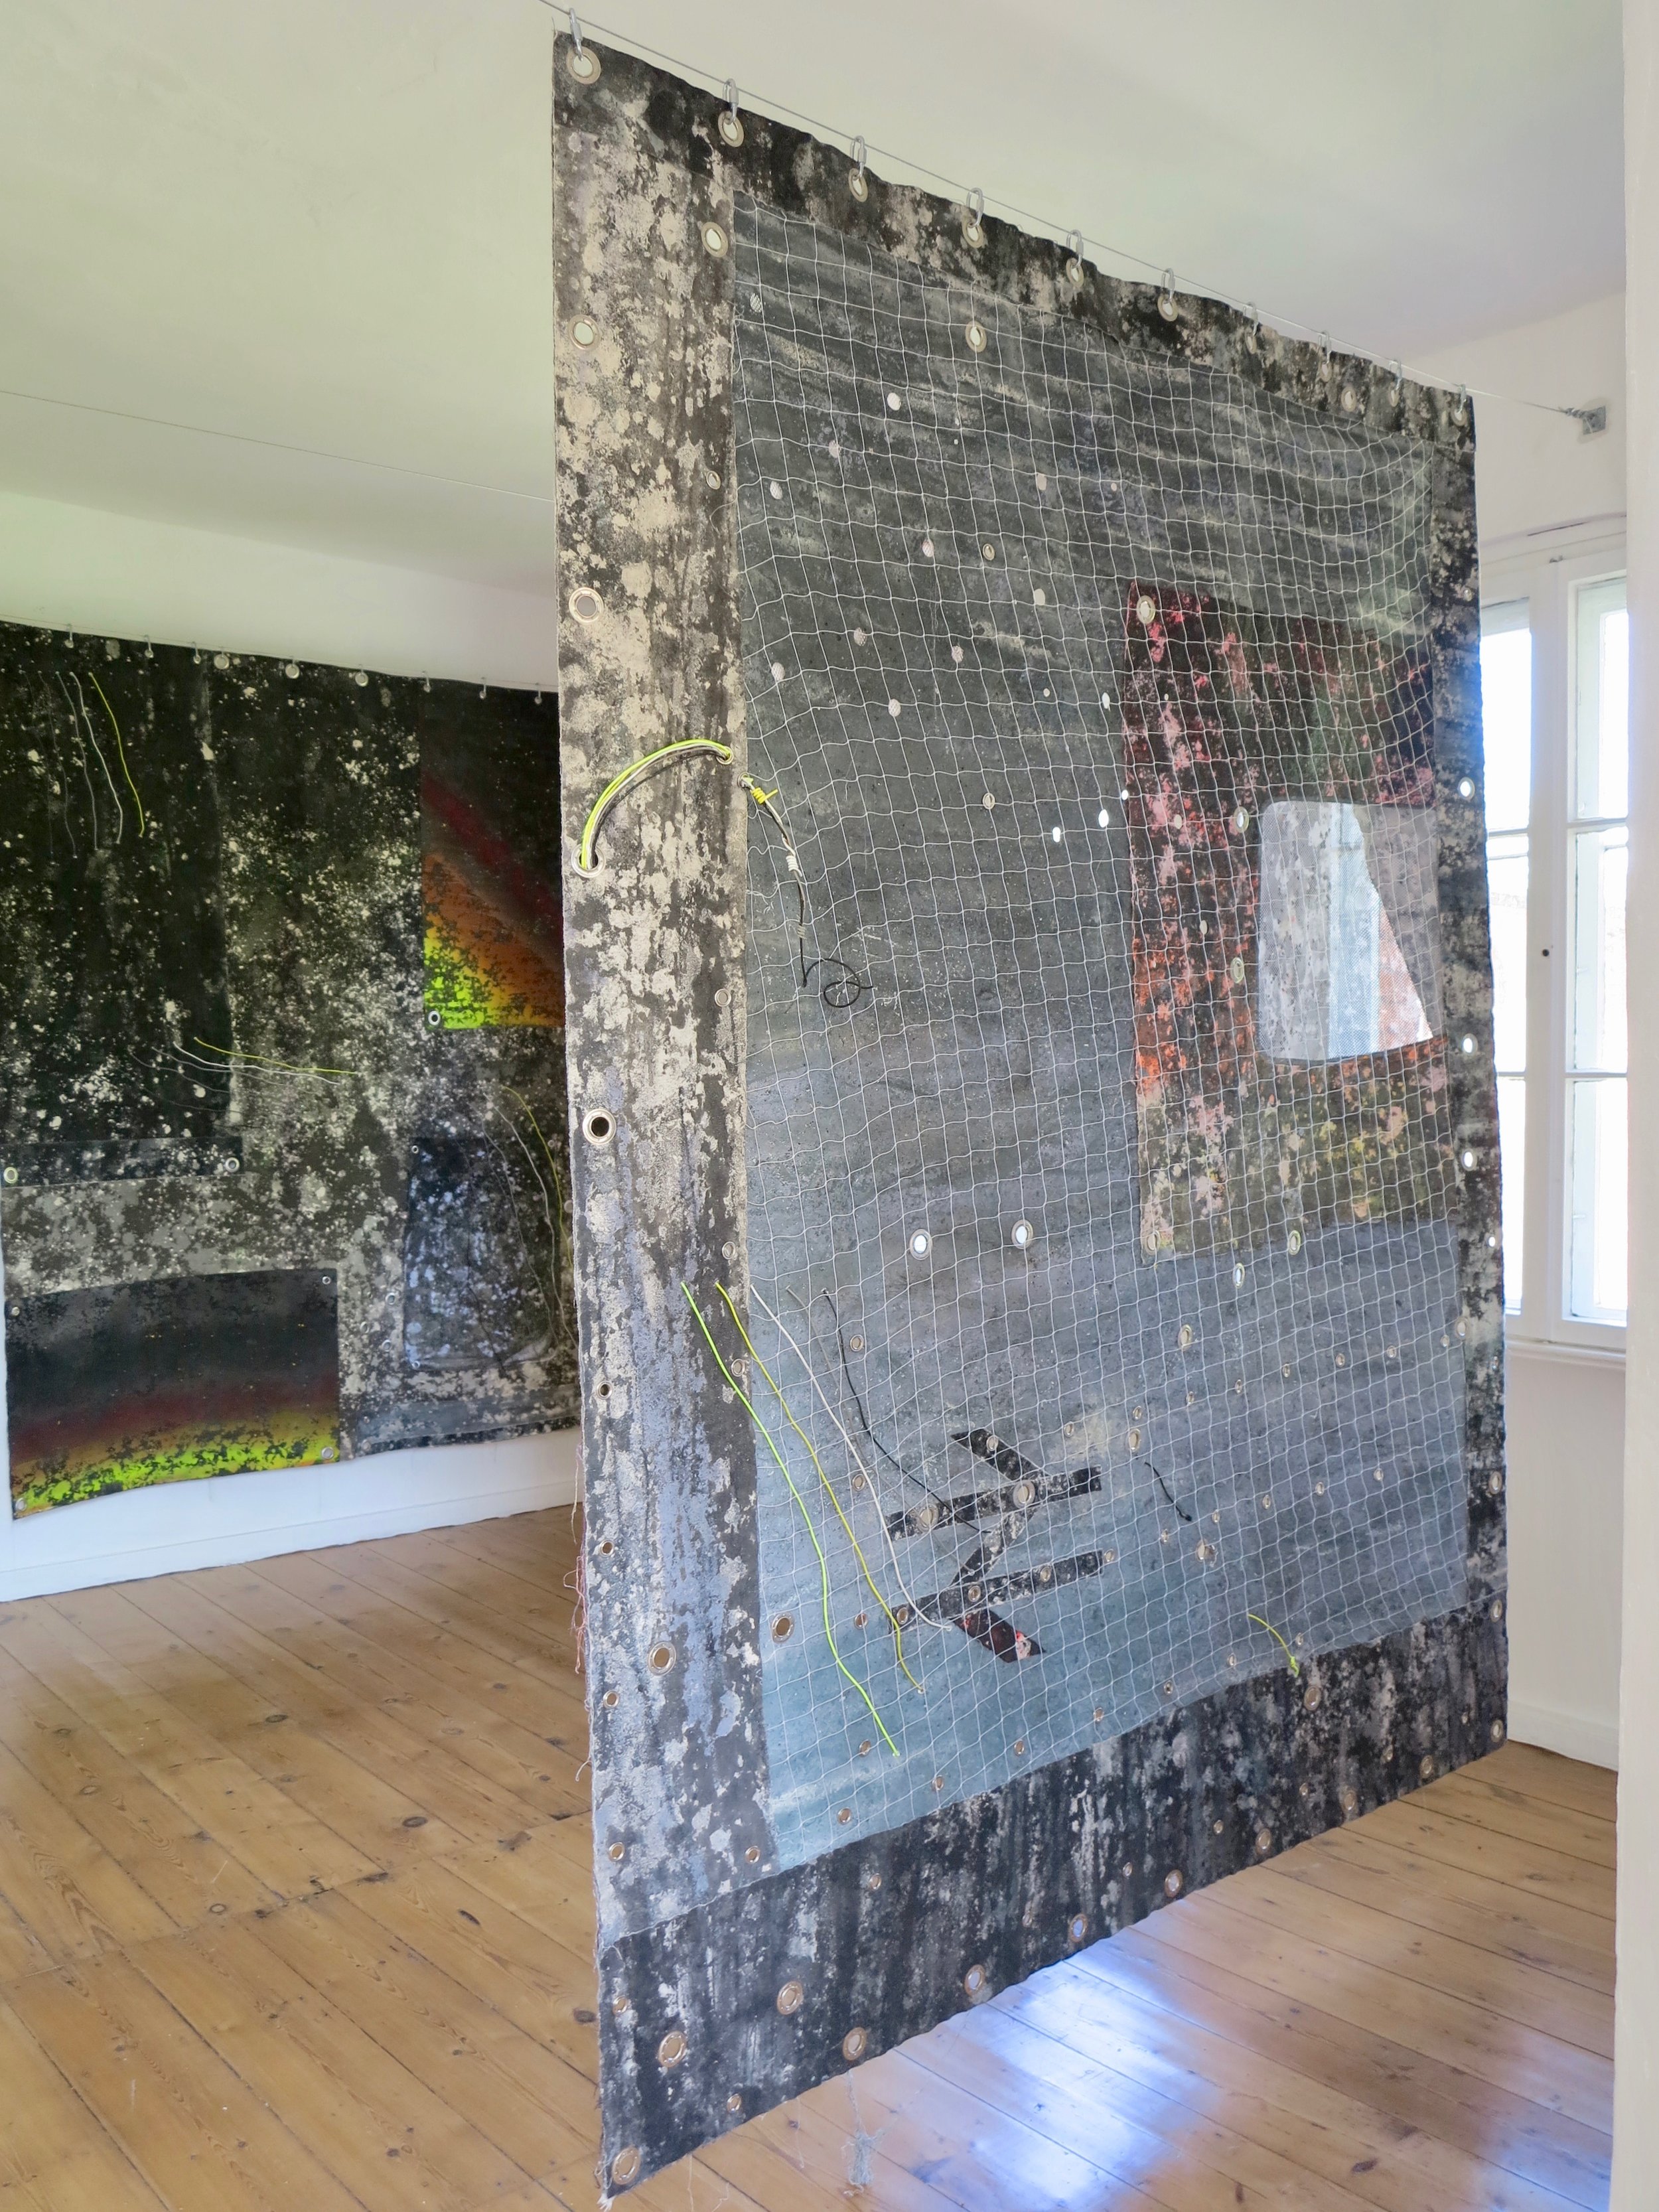   Loco Motif (B Side).   Alkyd resin, acrylic, sand, brass, rubber, polyester, polyethylene, canvas and steel.  Double sided / 266 x 213 cm.   Heterotopic Tourism  @ Lab Kalkhorst, Germany 2019. 